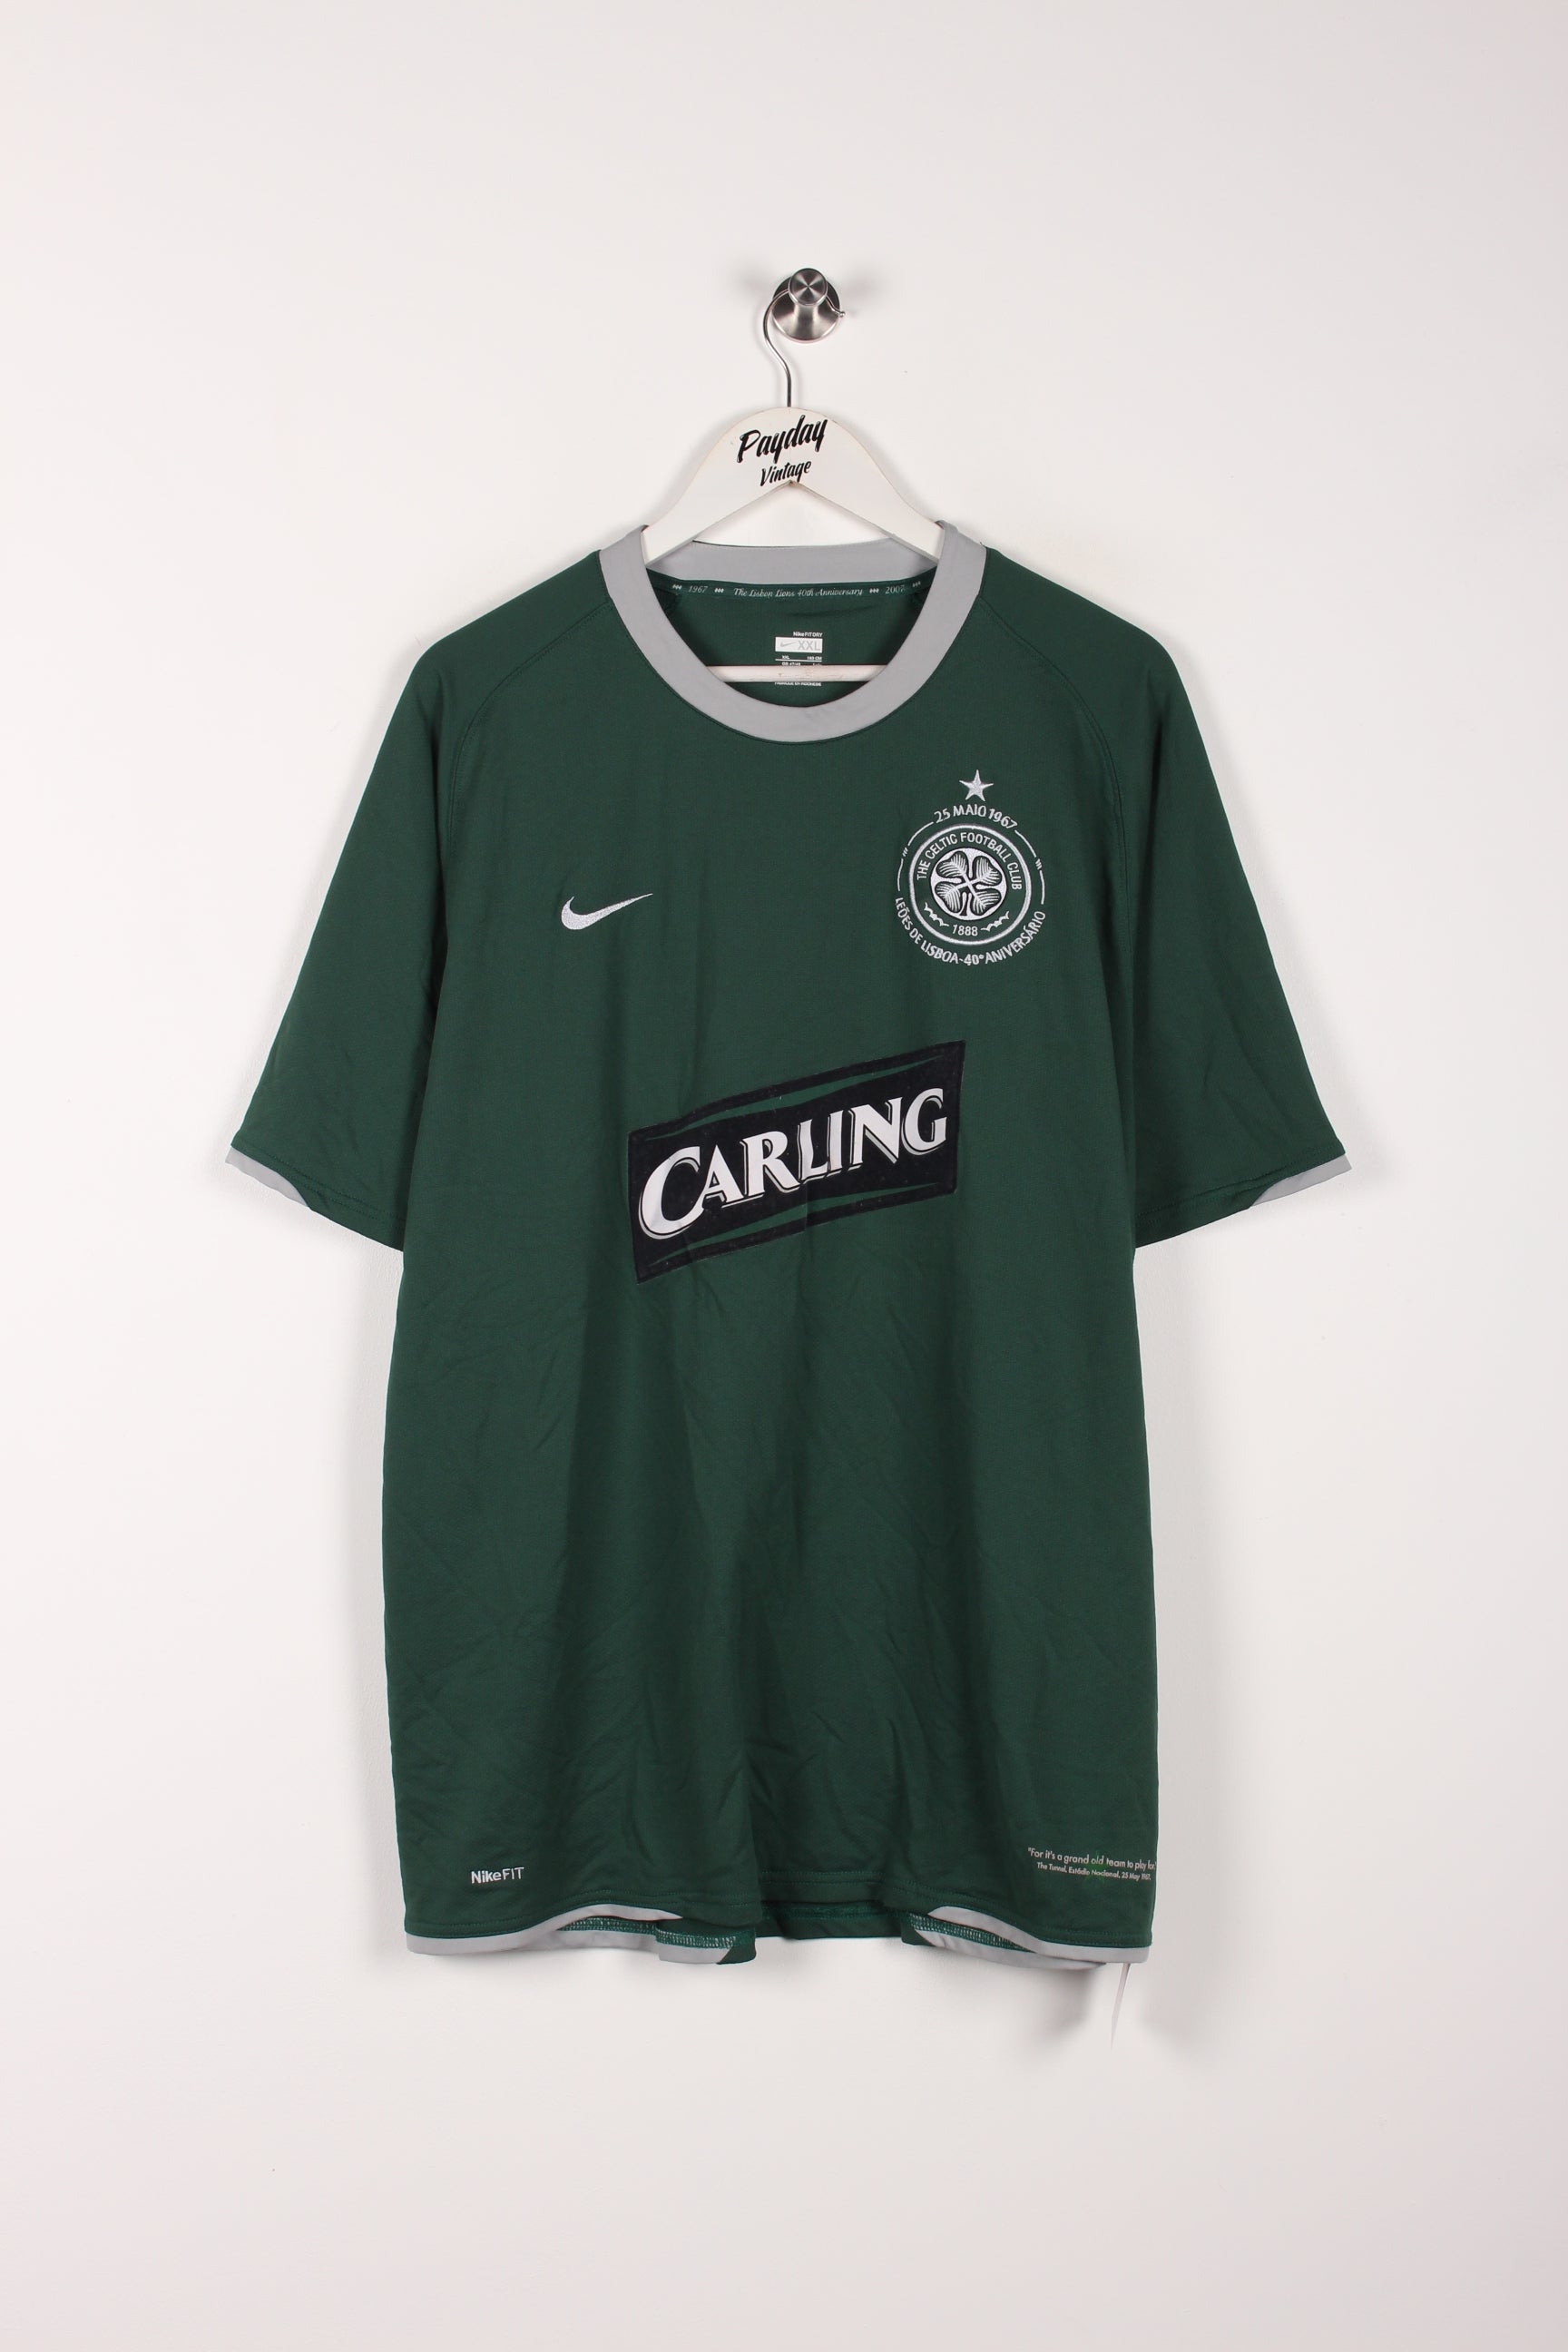 Celtic Away Shirt 2007-08 XL Brand New With Tags